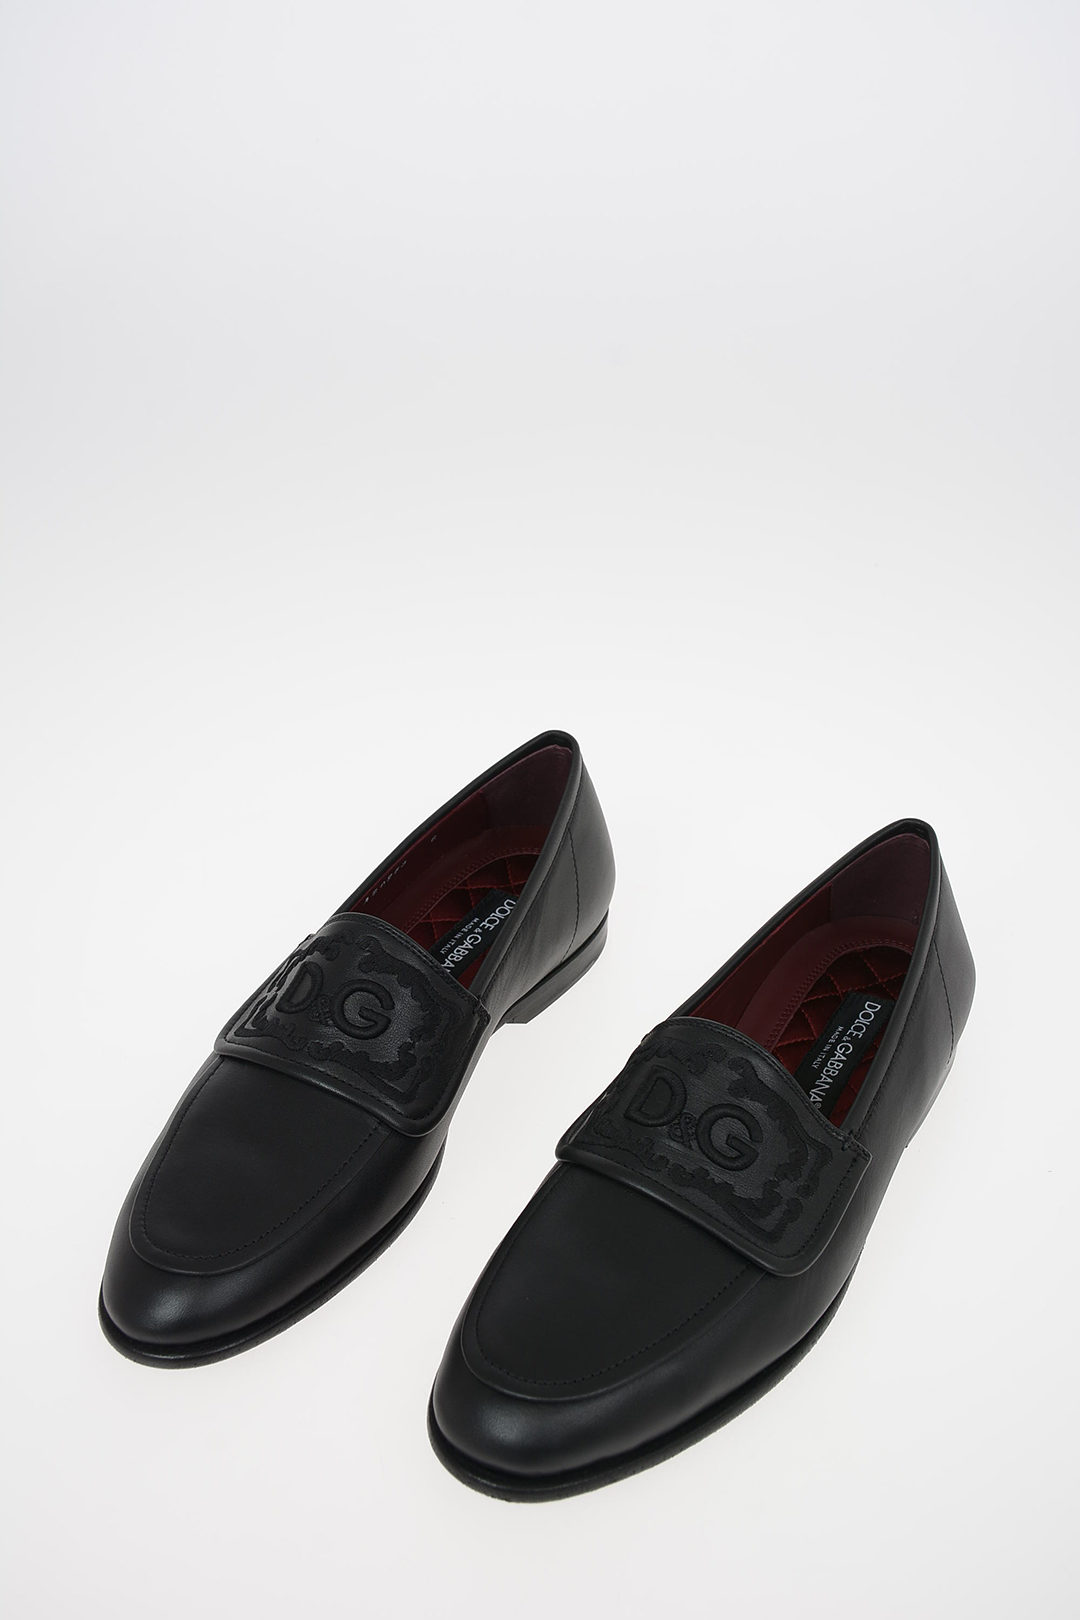 Dolce & Gabbana Leather KING CITY Loafers with Embroidery men - Glamood  Outlet